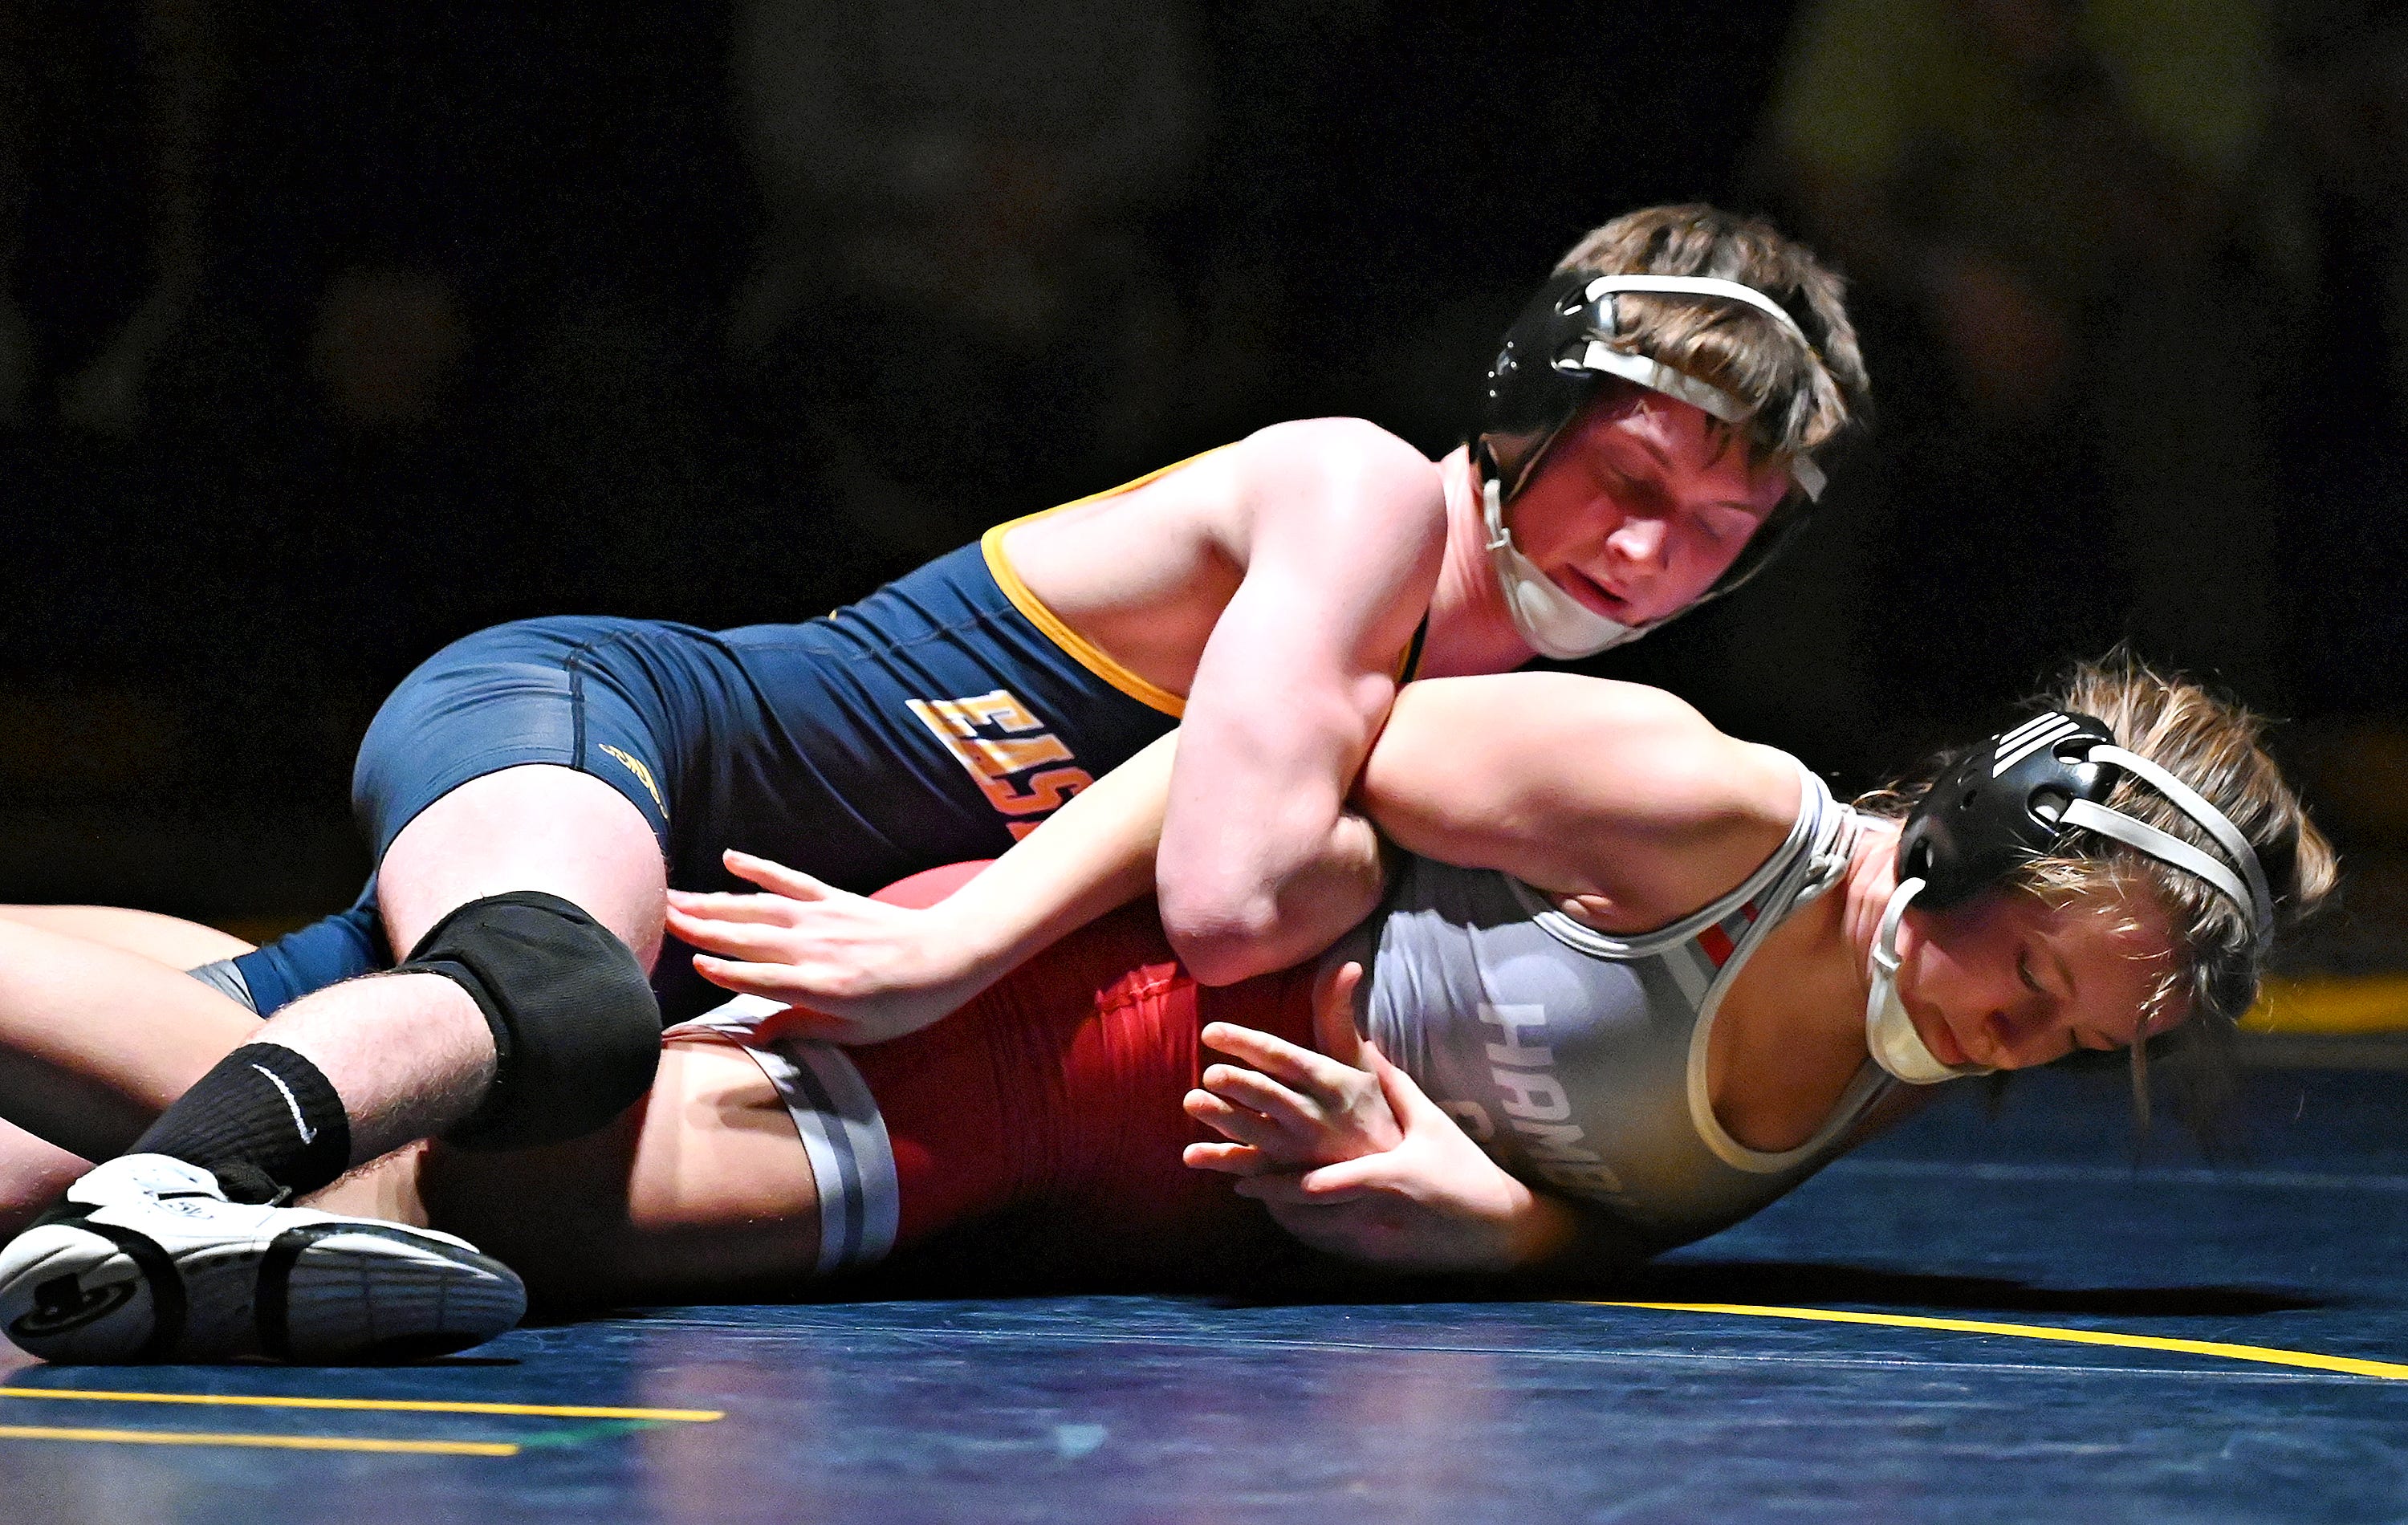 Eastern York’s George Leischner, back, and Hamburg’s Riley Petrie compete in the 127-pound weight class during PIAA District 3, Class 2-A first round wrestling action at Eastern York High School in Lower Windsor Township, Monday, Jan. 30, 2023. Leischner would win with a pin at 1:29 and Eastern York would win the meet 50-22. Dawn J. Sagert photo